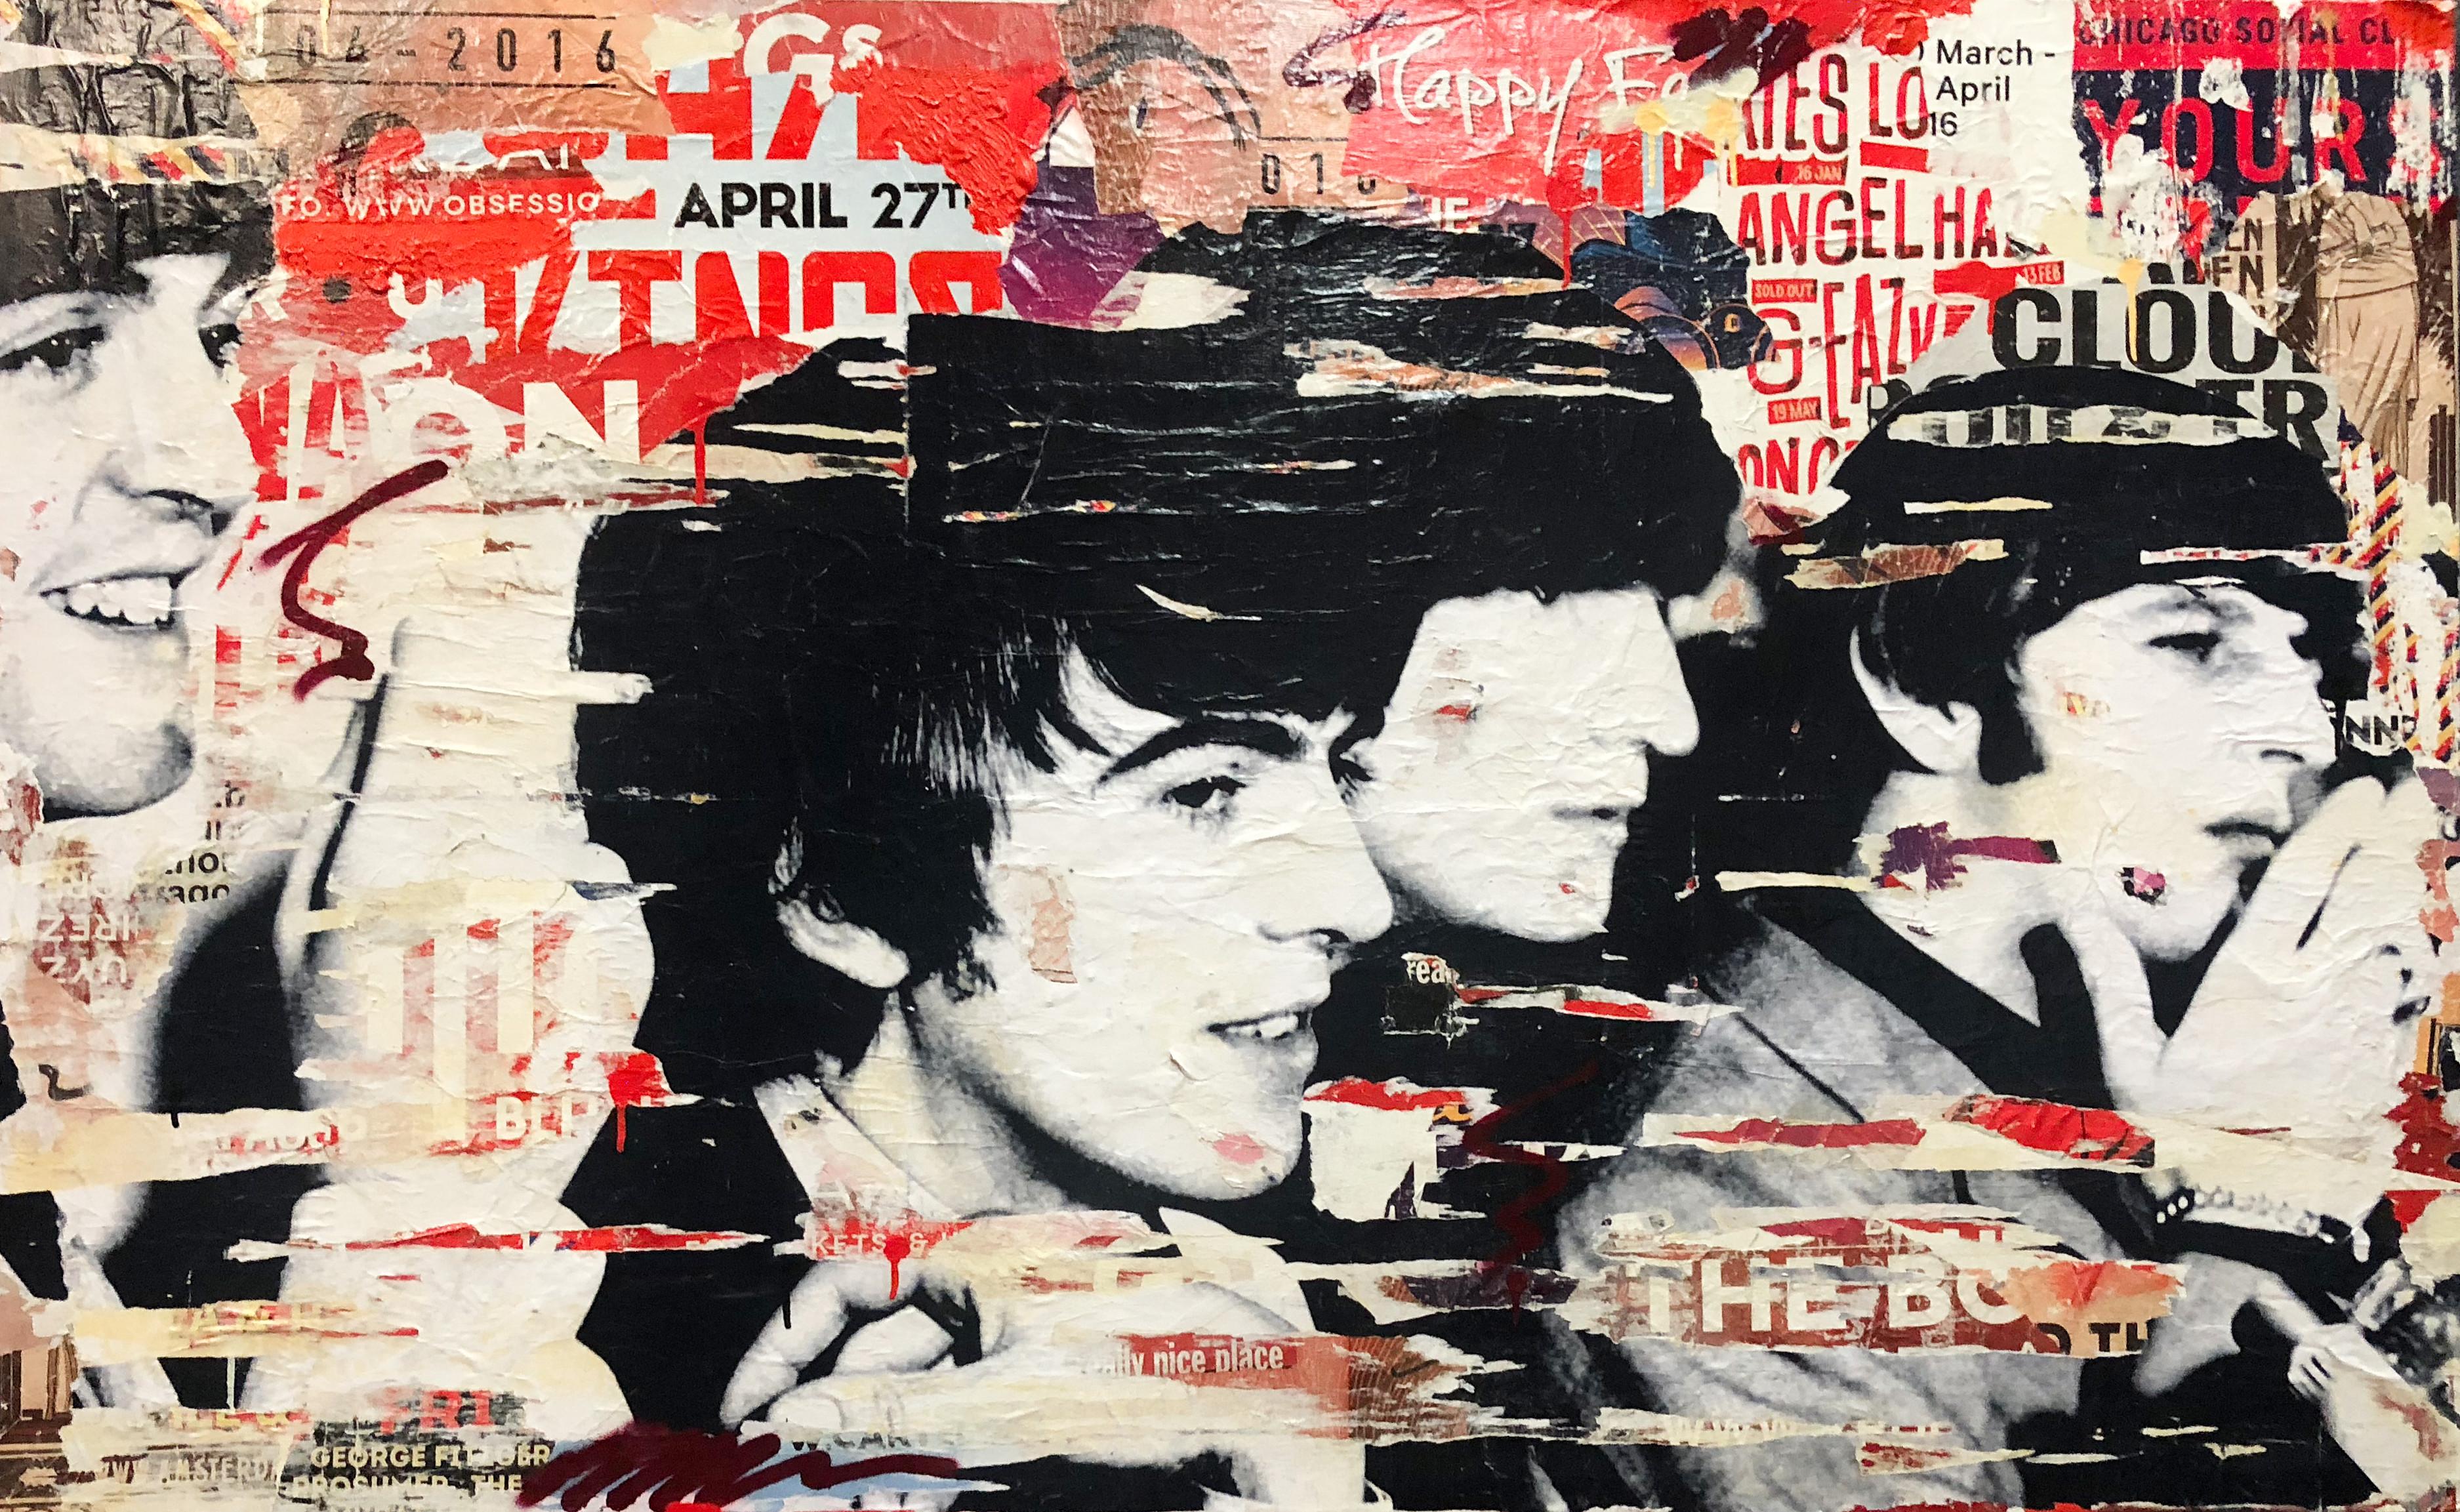 Beatles - Original Collage on Canvas - 39 x 63 in. - Mixed Media Art by Michiel Folkers